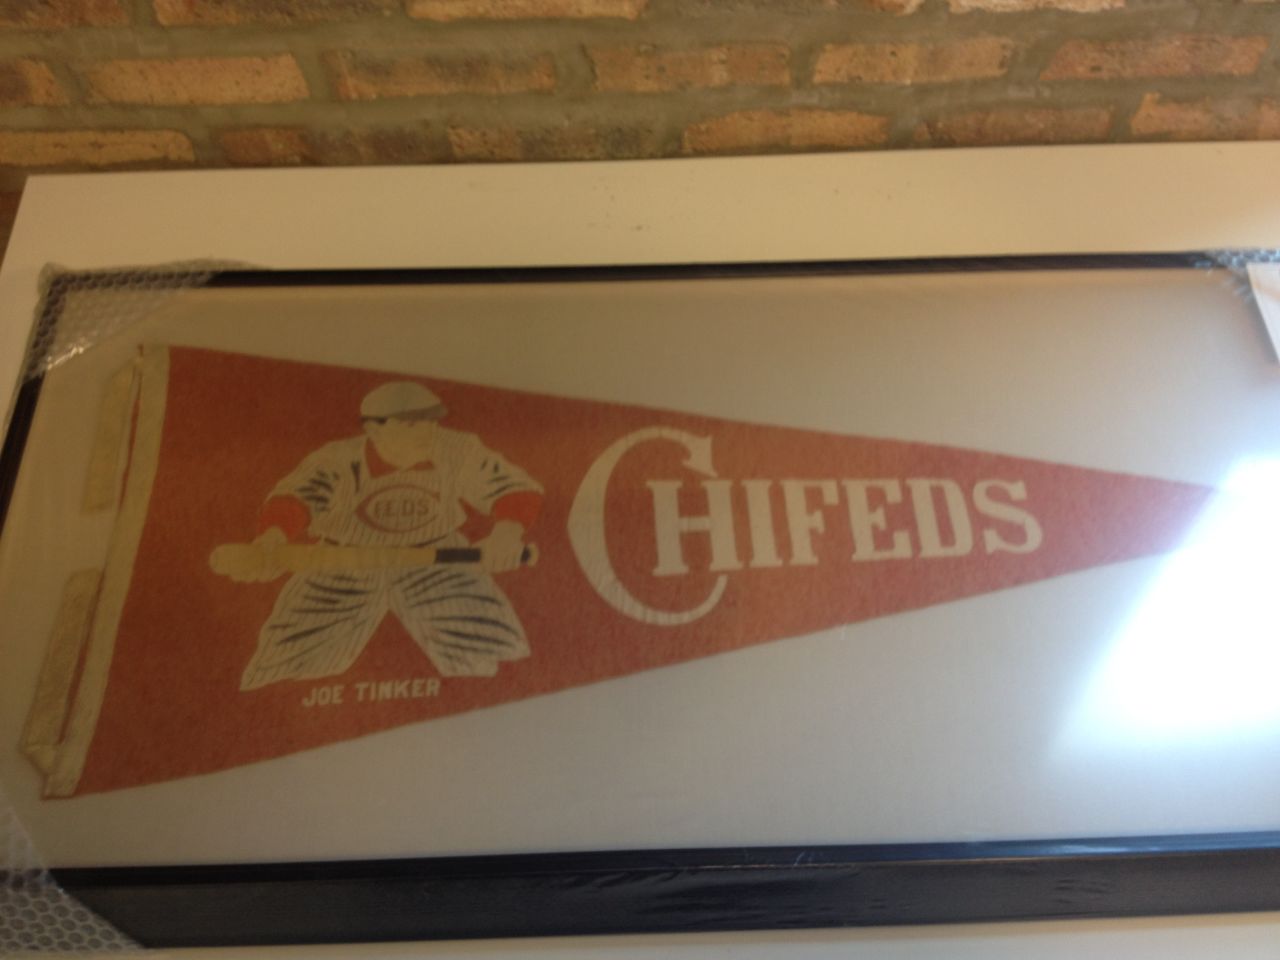 This 100-year-old pennant was made for the Chicago Federal League baseball team, the Chicago Whales. The Chi-Feds, as they were known, were the original occupants of Wrigley Field, which was called Weeghman Park when it opened in 1914. It was named Wrigley Field in 1926. <a href="http://ireport.cnn.com/docs/DOC-1120411">Peter LaSorsa</a> purchased the rare pennant for his baseball memorabilia collection.